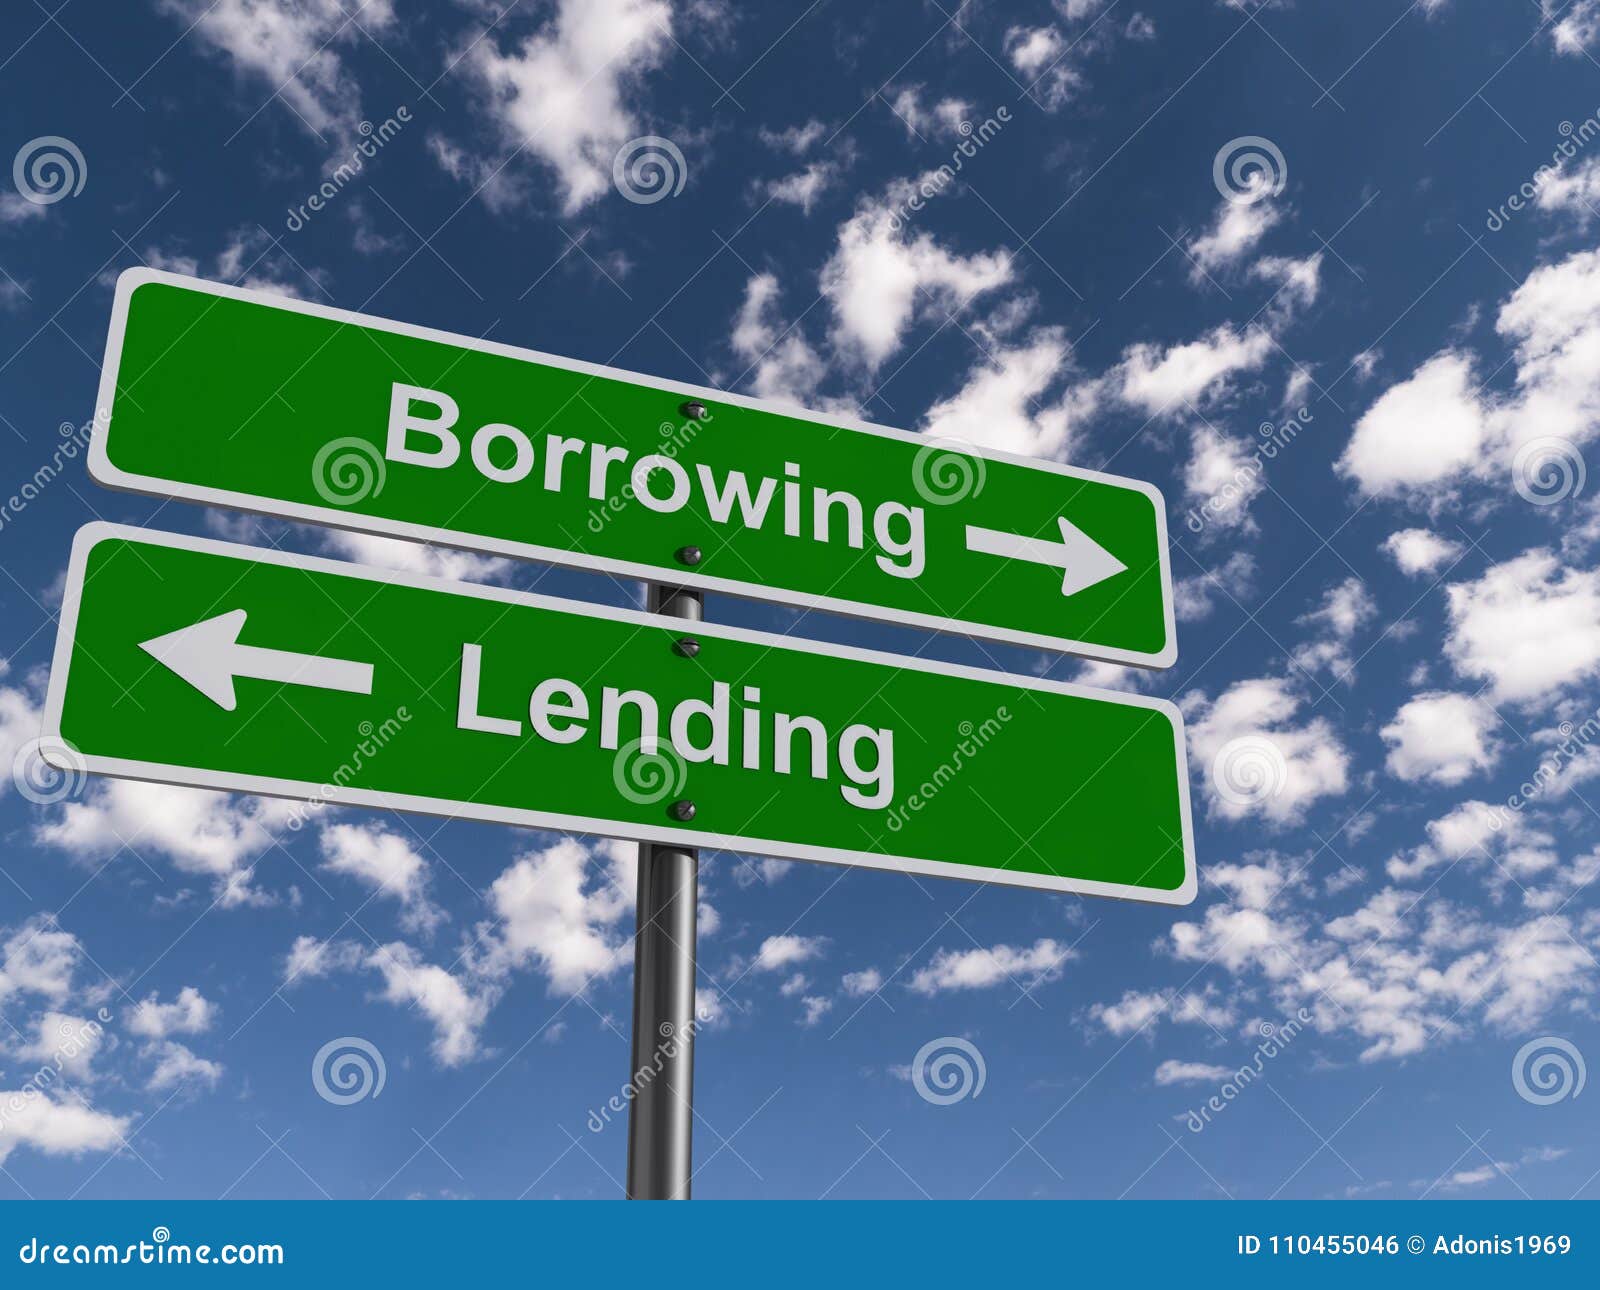 borrowing and lending signs